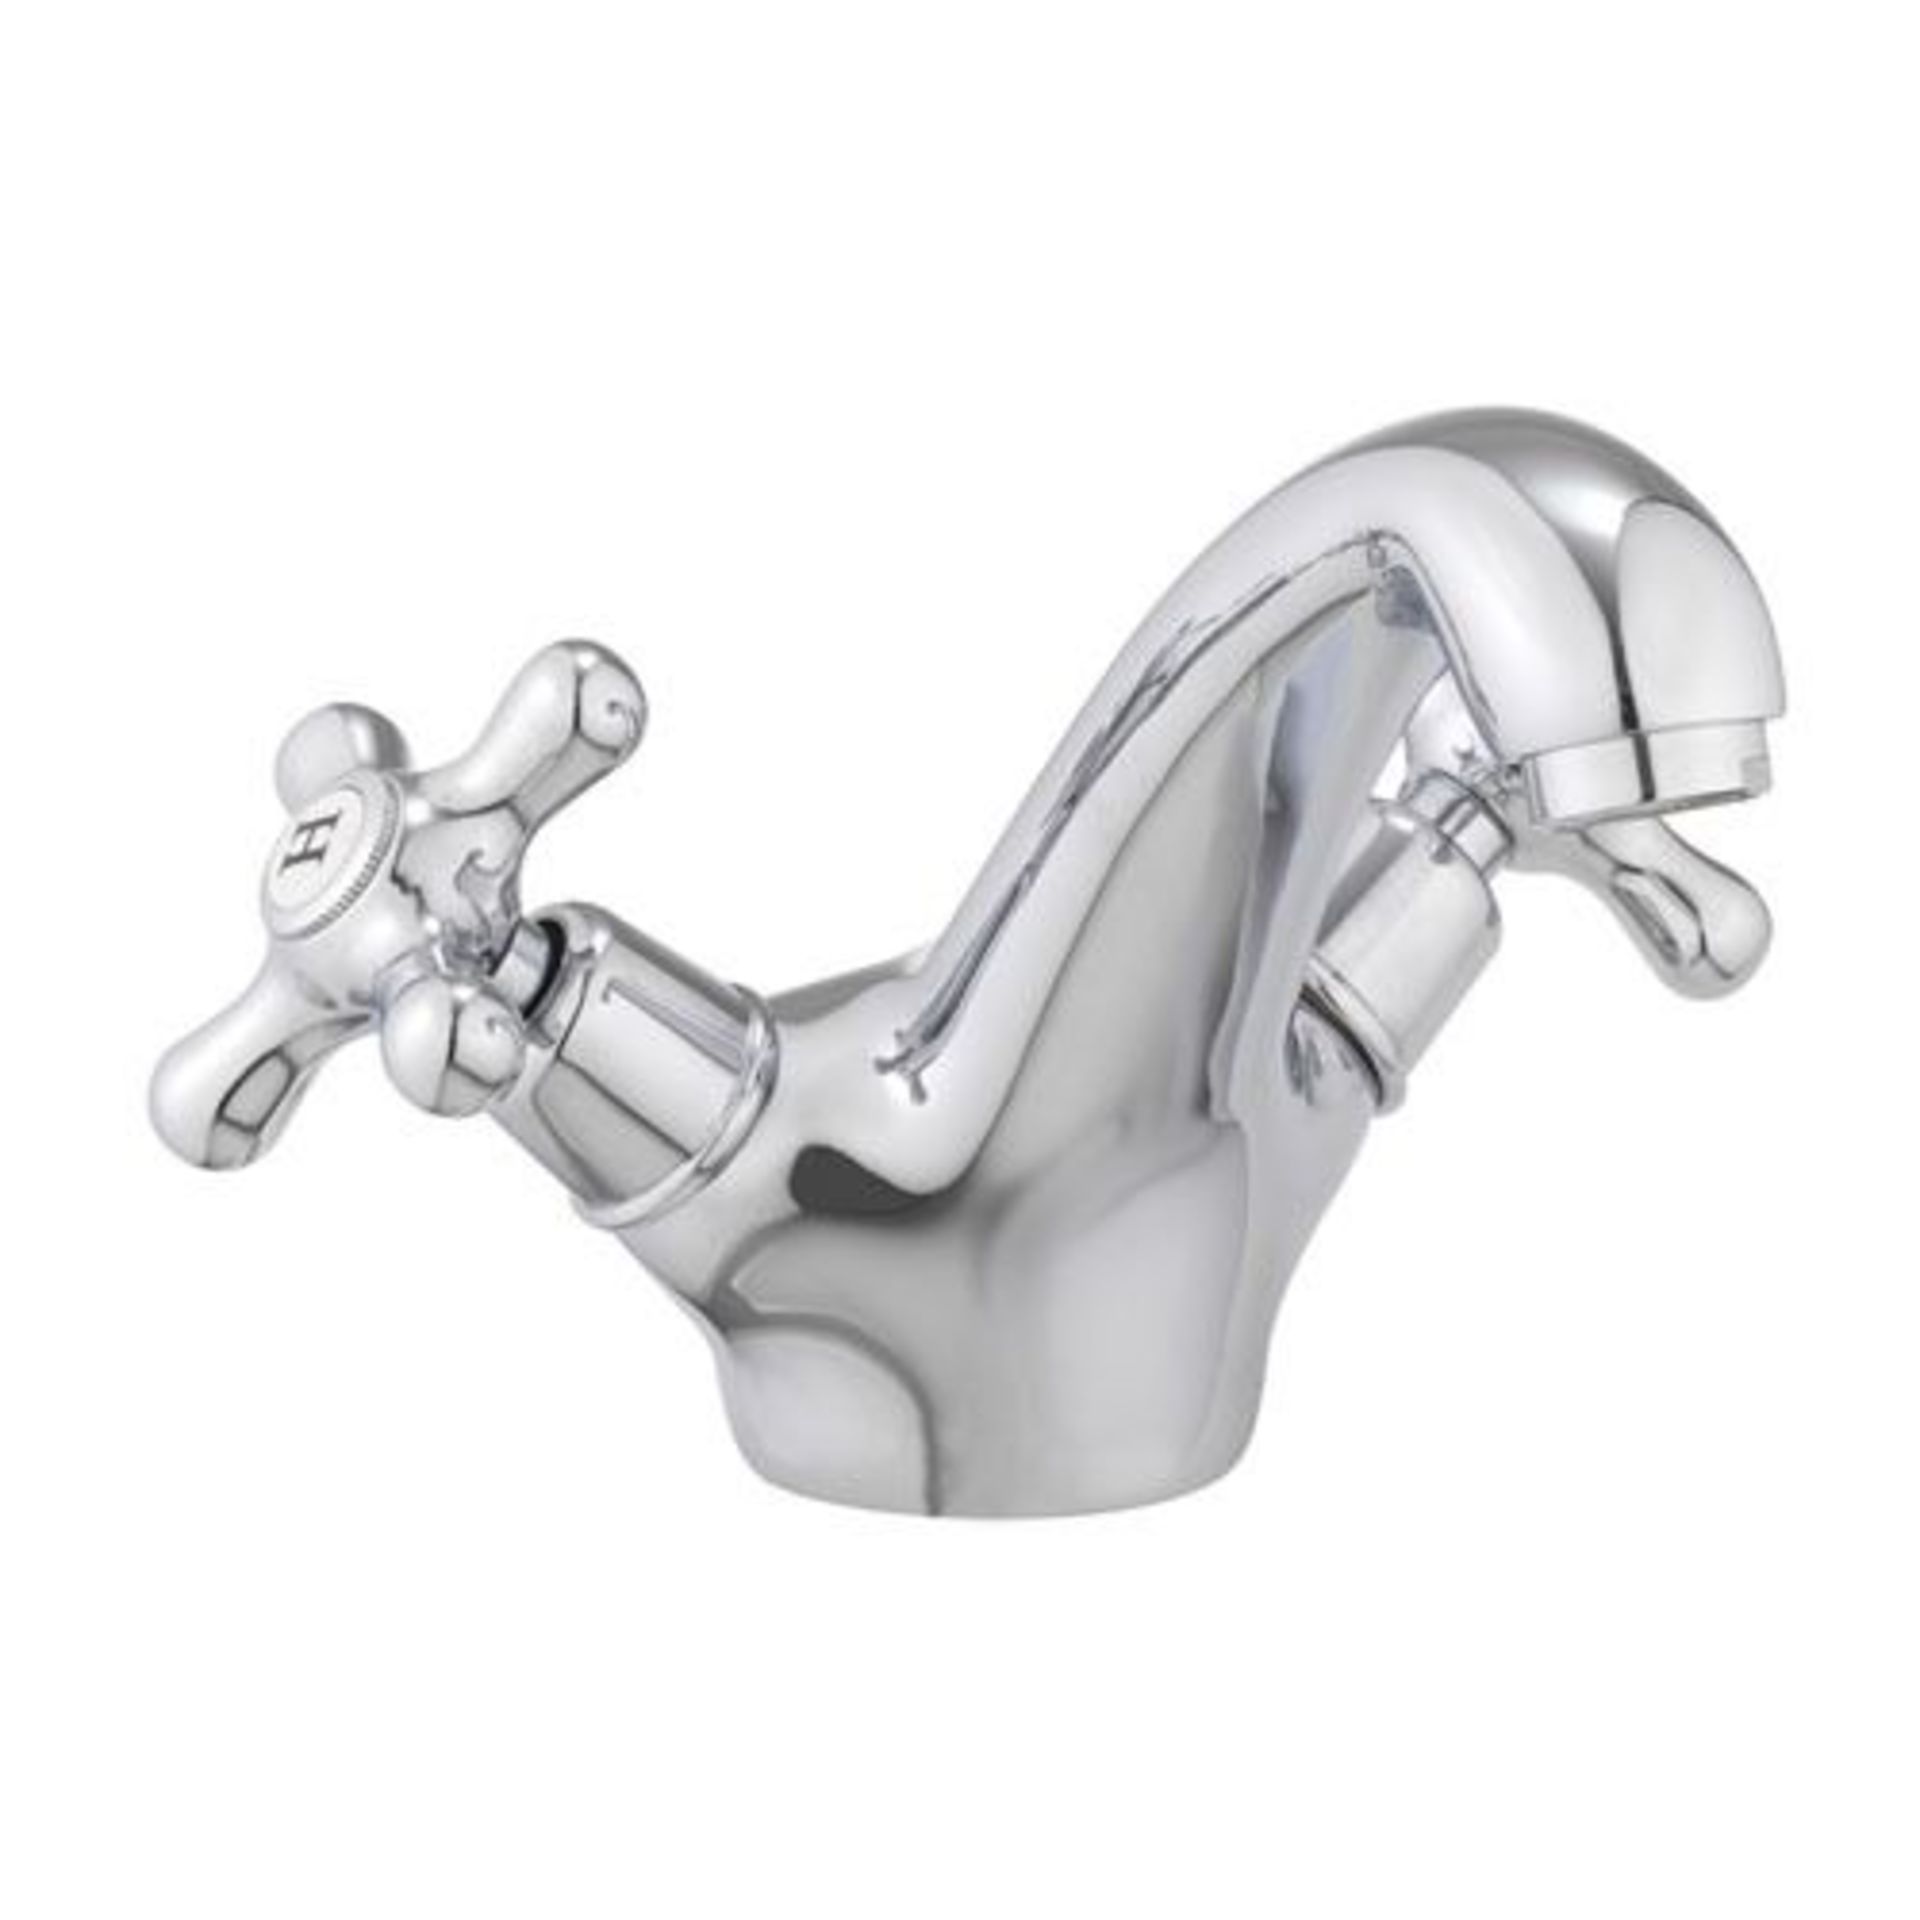 Traditional basin mixer tap with pop-up - Image 2 of 2